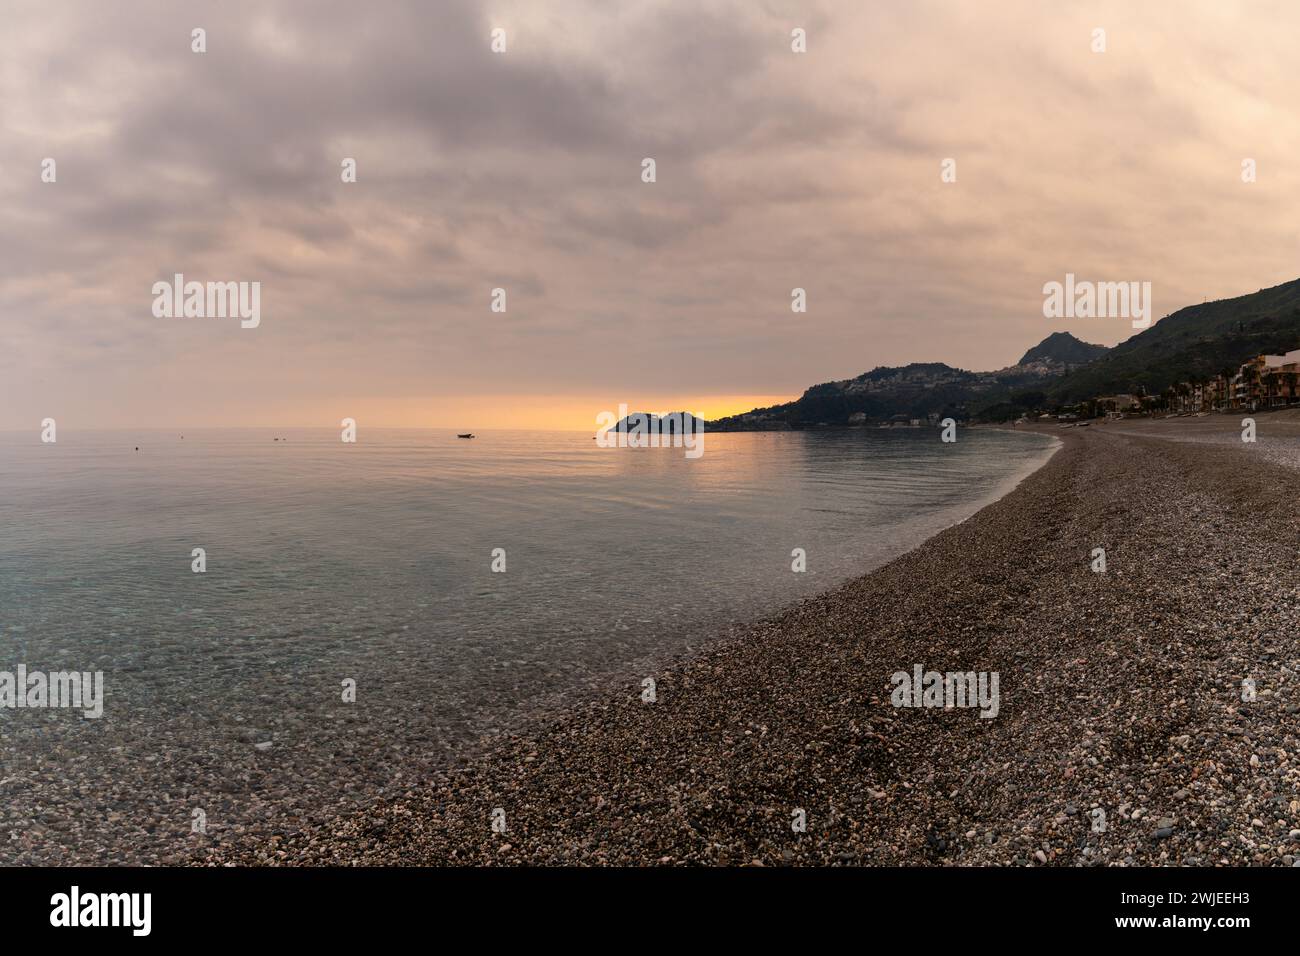 A view of the stone pebble beach and clear water at Letojanni on Sicily at sunsest Stock Photo